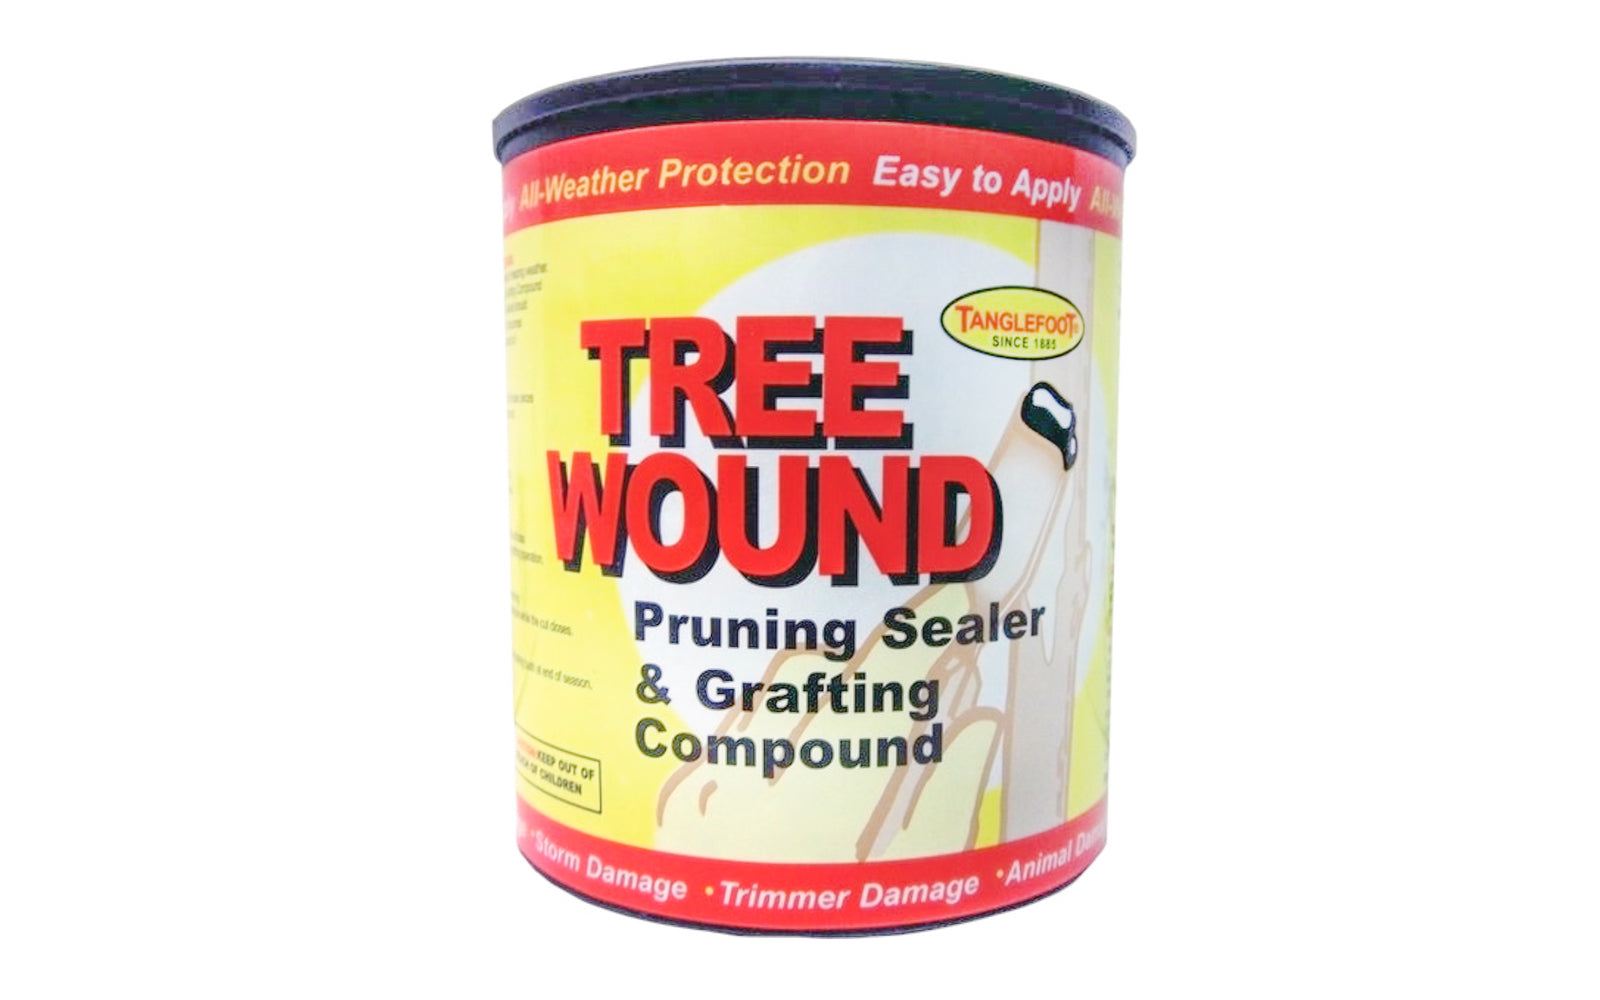 Tanglefoot Tree Wound - 16 oz. Pruning sealer & grafting compound. Helps repair damage caused by pruning, animals, insects, power equipment, & storms. Ideal to seal wounds, grafts, & tree cavities. Provides pliable, protective seal for tree wounds. Waterproof & not affected by freezing temperatures. Ready-to-use, fast drying, water soluble.  Made in USA.